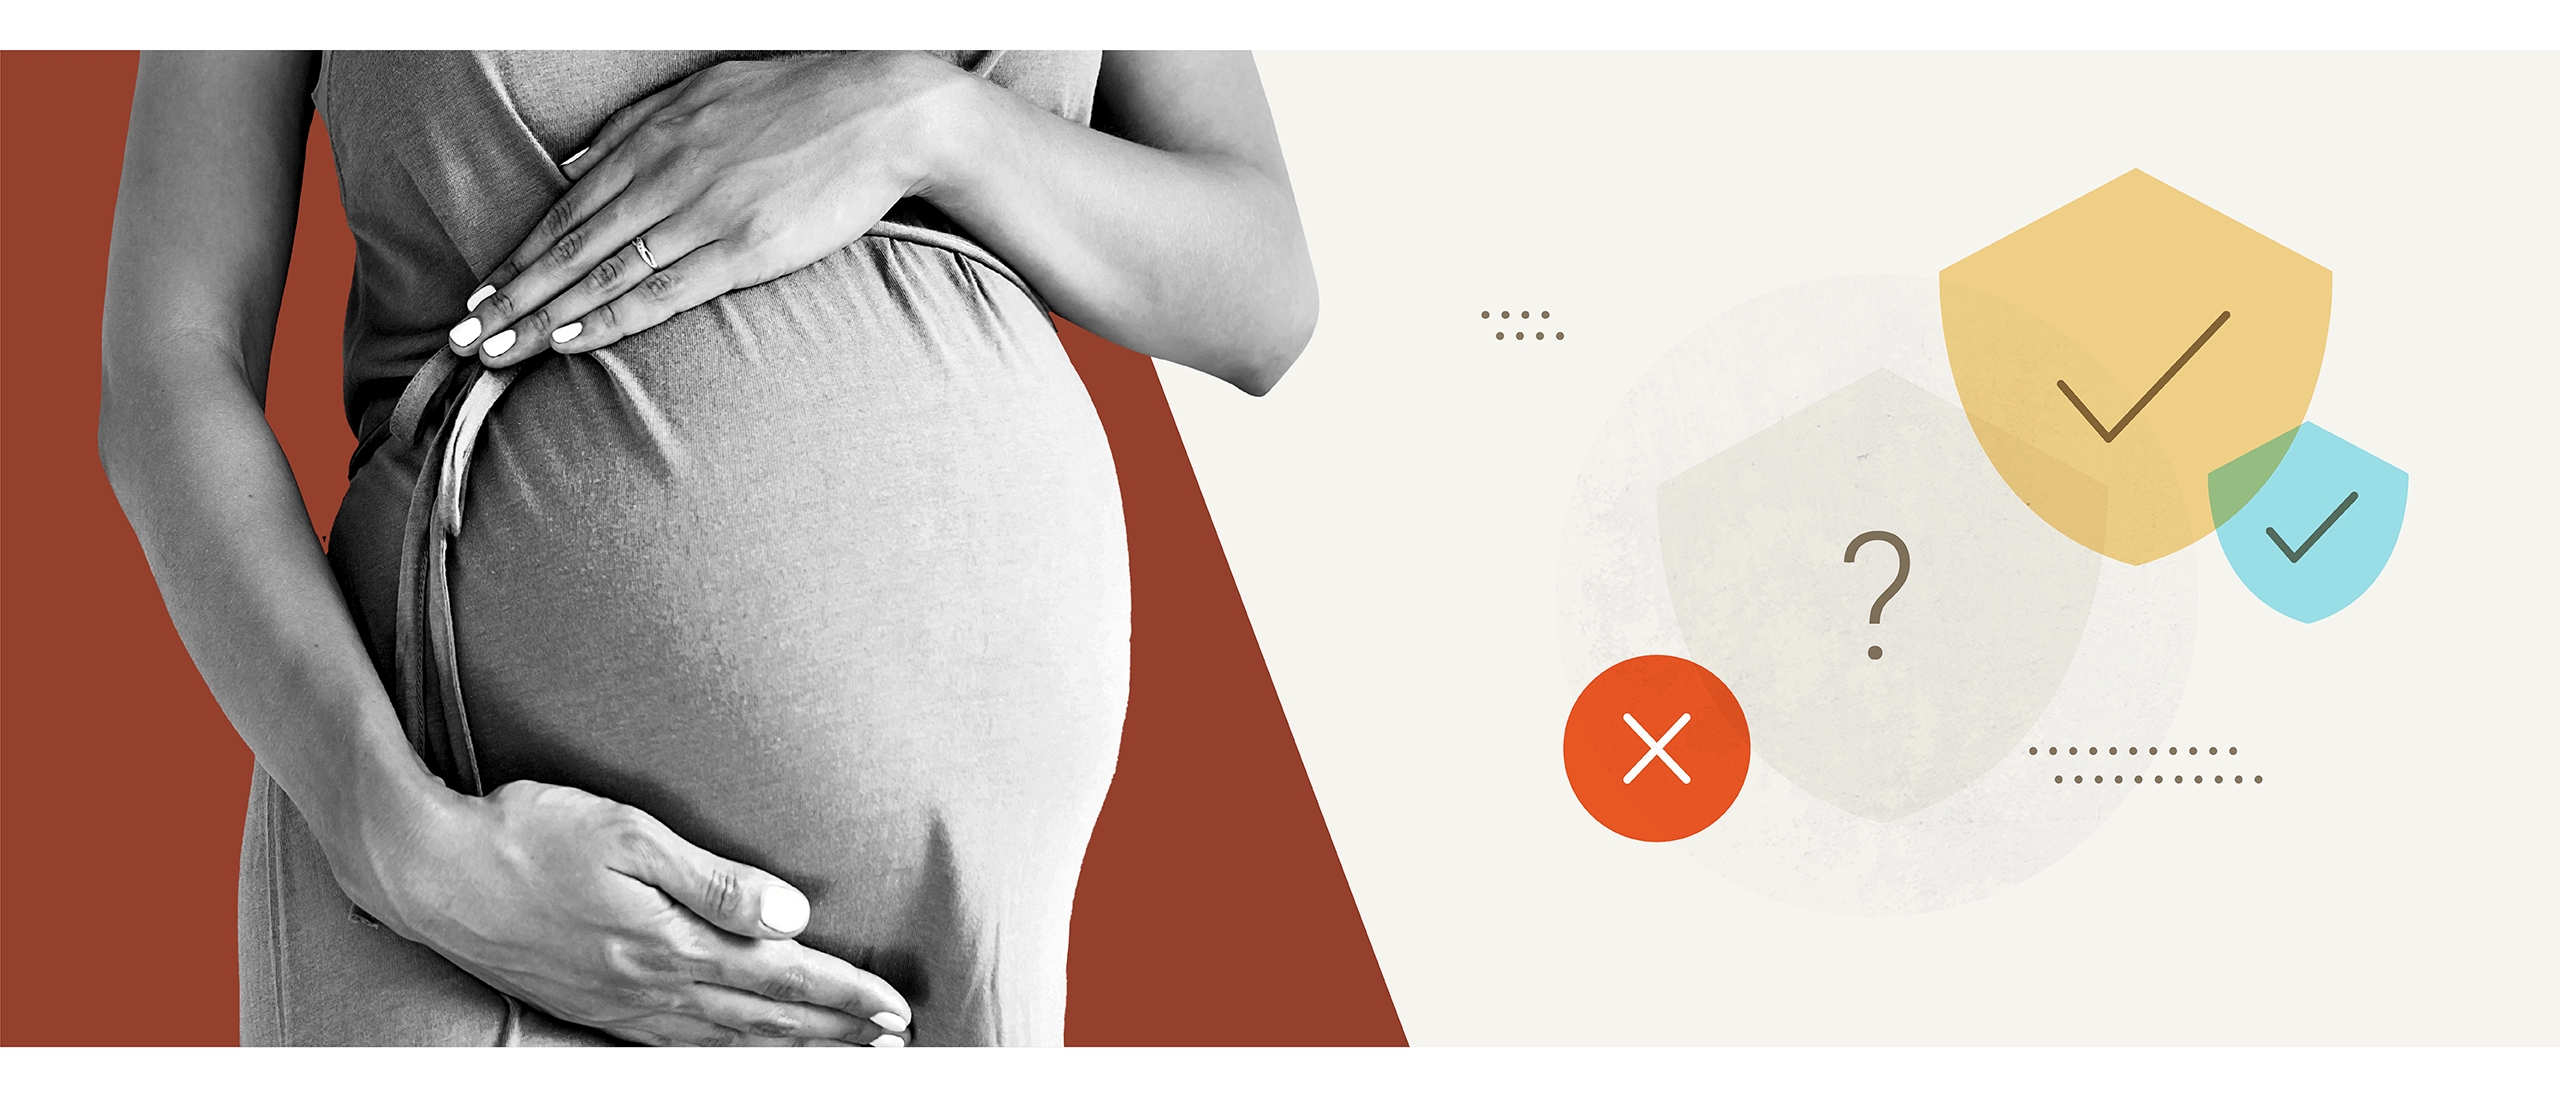 Featured image for Mineral blog post "What is the Pregnant Workers Fairness Act? Plus 6 More Legal Answers About Pregnancy in the Workplace"